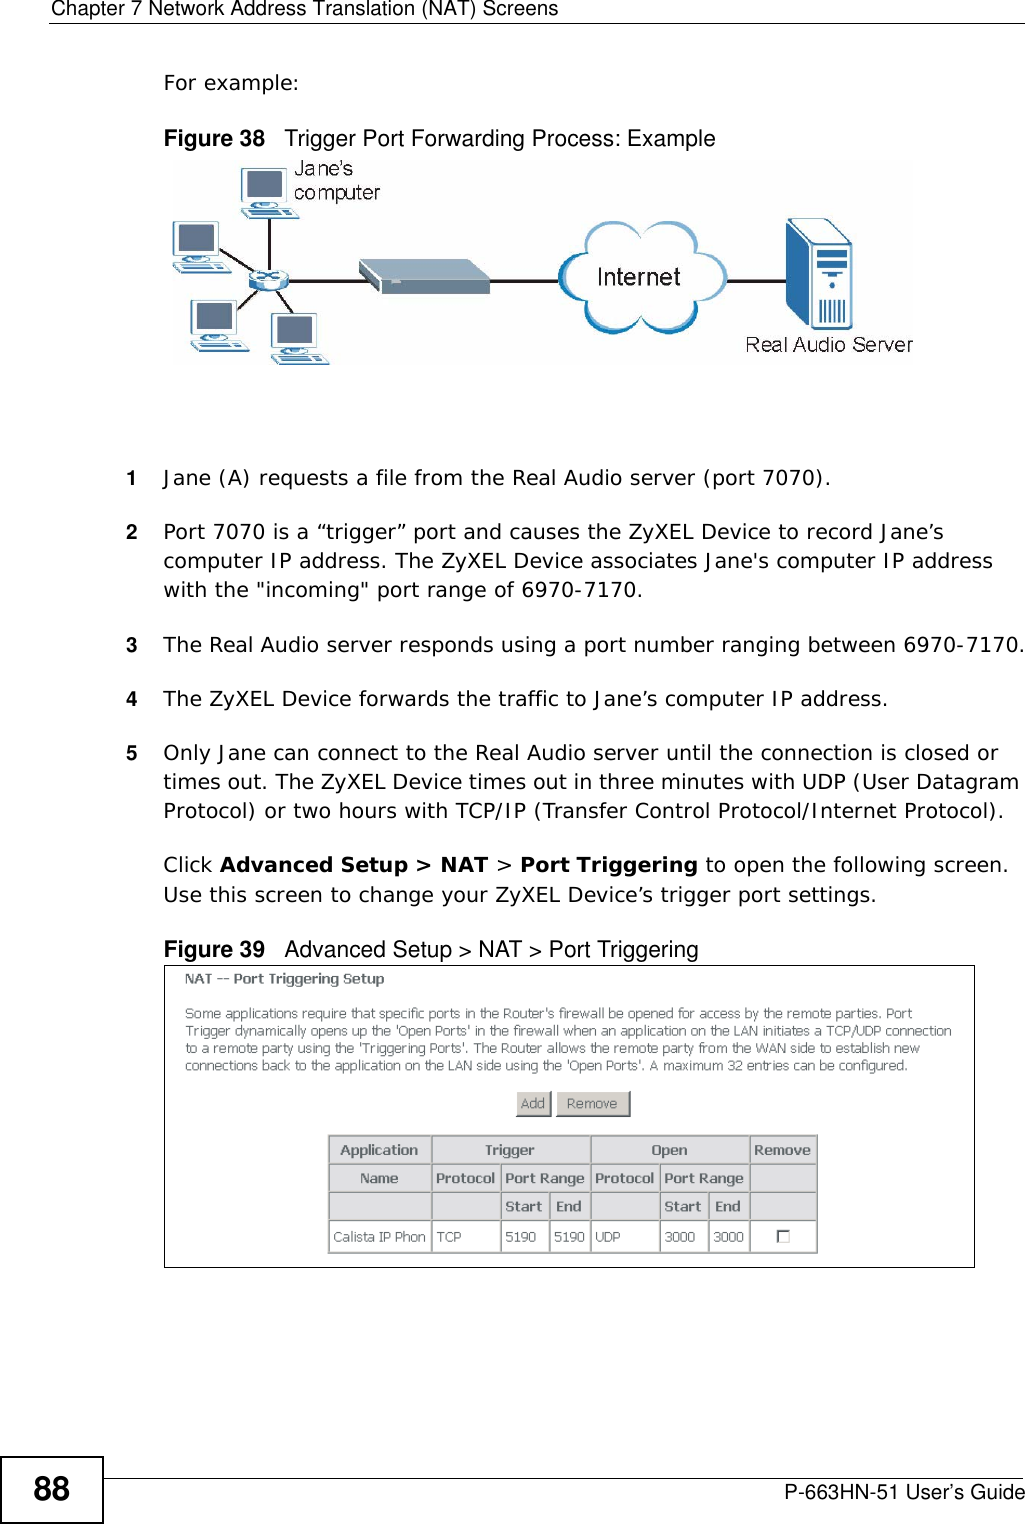 Chapter 7 Network Address Translation (NAT) ScreensP-663HN-51 User’s Guide88For example:Figure 38   Trigger Port Forwarding Process: Example1Jane (A) requests a file from the Real Audio server (port 7070).2Port 7070 is a “trigger” port and causes the ZyXEL Device to record Jane’s computer IP address. The ZyXEL Device associates Jane&apos;s computer IP address with the &quot;incoming&quot; port range of 6970-7170.3The Real Audio server responds using a port number ranging between 6970-7170.4The ZyXEL Device forwards the traffic to Jane’s computer IP address. 5Only Jane can connect to the Real Audio server until the connection is closed or times out. The ZyXEL Device times out in three minutes with UDP (User Datagram Protocol) or two hours with TCP/IP (Transfer Control Protocol/Internet Protocol). Click Advanced Setup &gt; NAT &gt; Port Triggering to open the following screen. Use this screen to change your ZyXEL Device’s trigger port settings.Figure 39   Advanced Setup &gt; NAT &gt; Port Triggering 